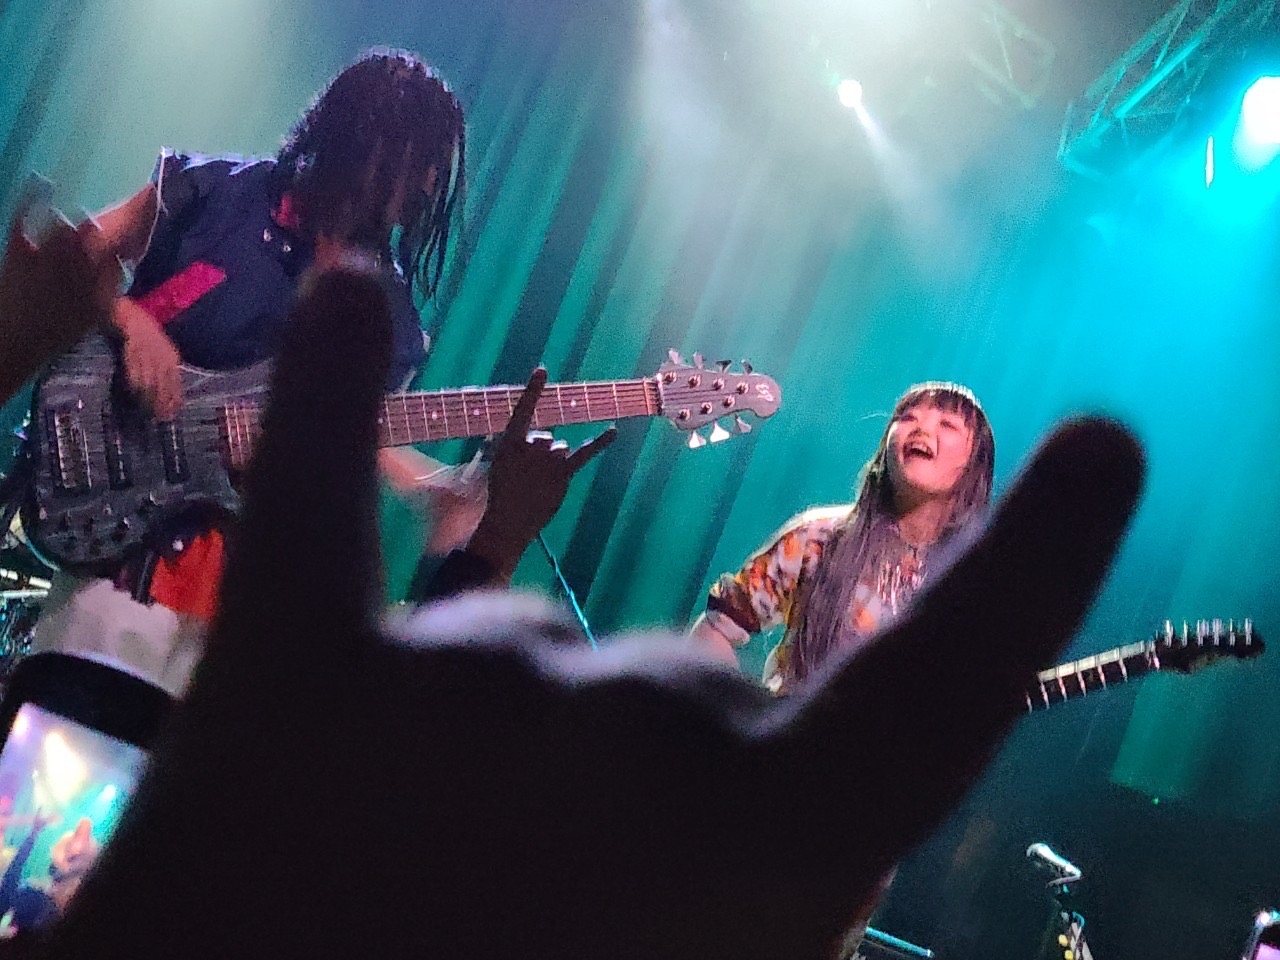 ASTERISM in New York City. Pictured from left to right: MIYU and HAL-CA. Photo provided by Sony Music Entertainment Japan (SMEJ)